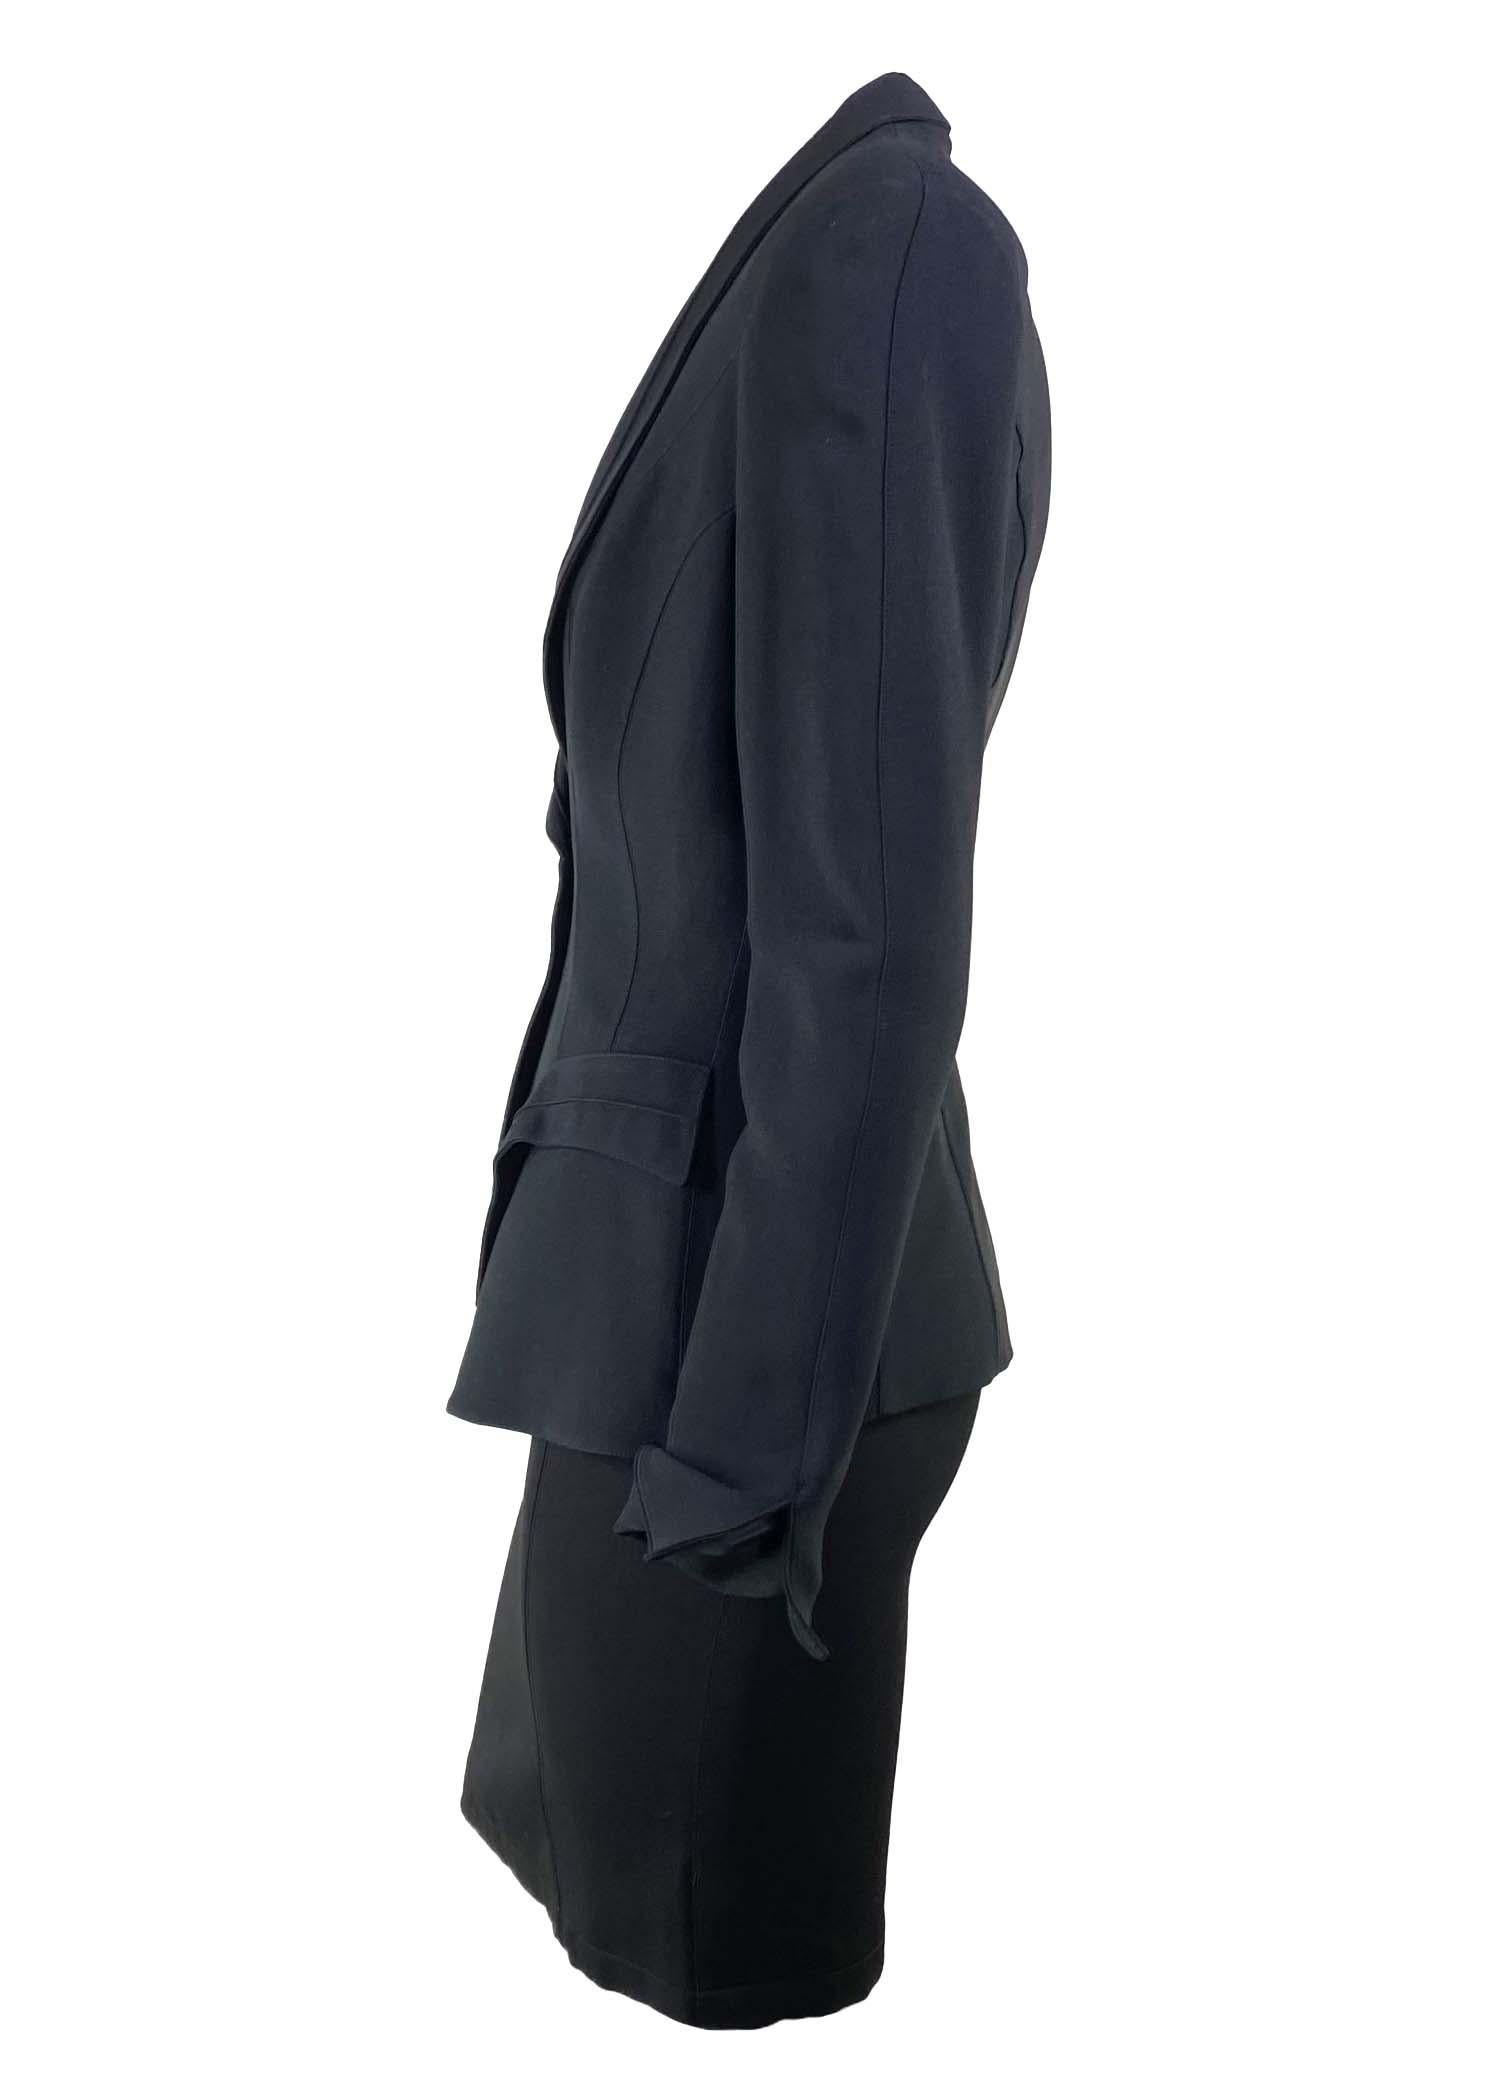 Cruise 1993 Thierry Mugler Runway Sculptural Curved Pockets Black Skirt Suit 1